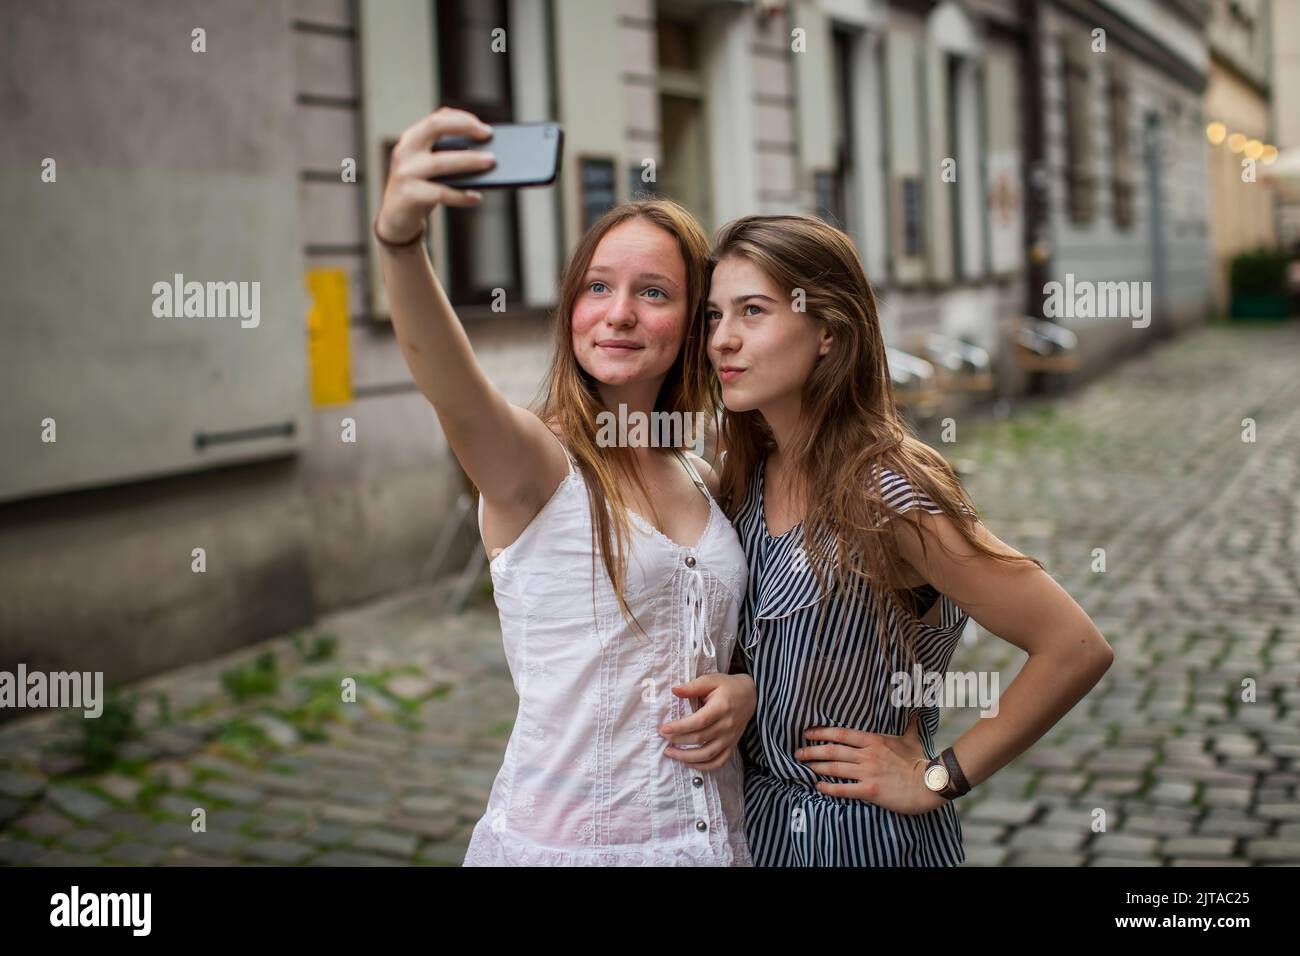 Two pretty girls taking selfies on the street. Stock Photo